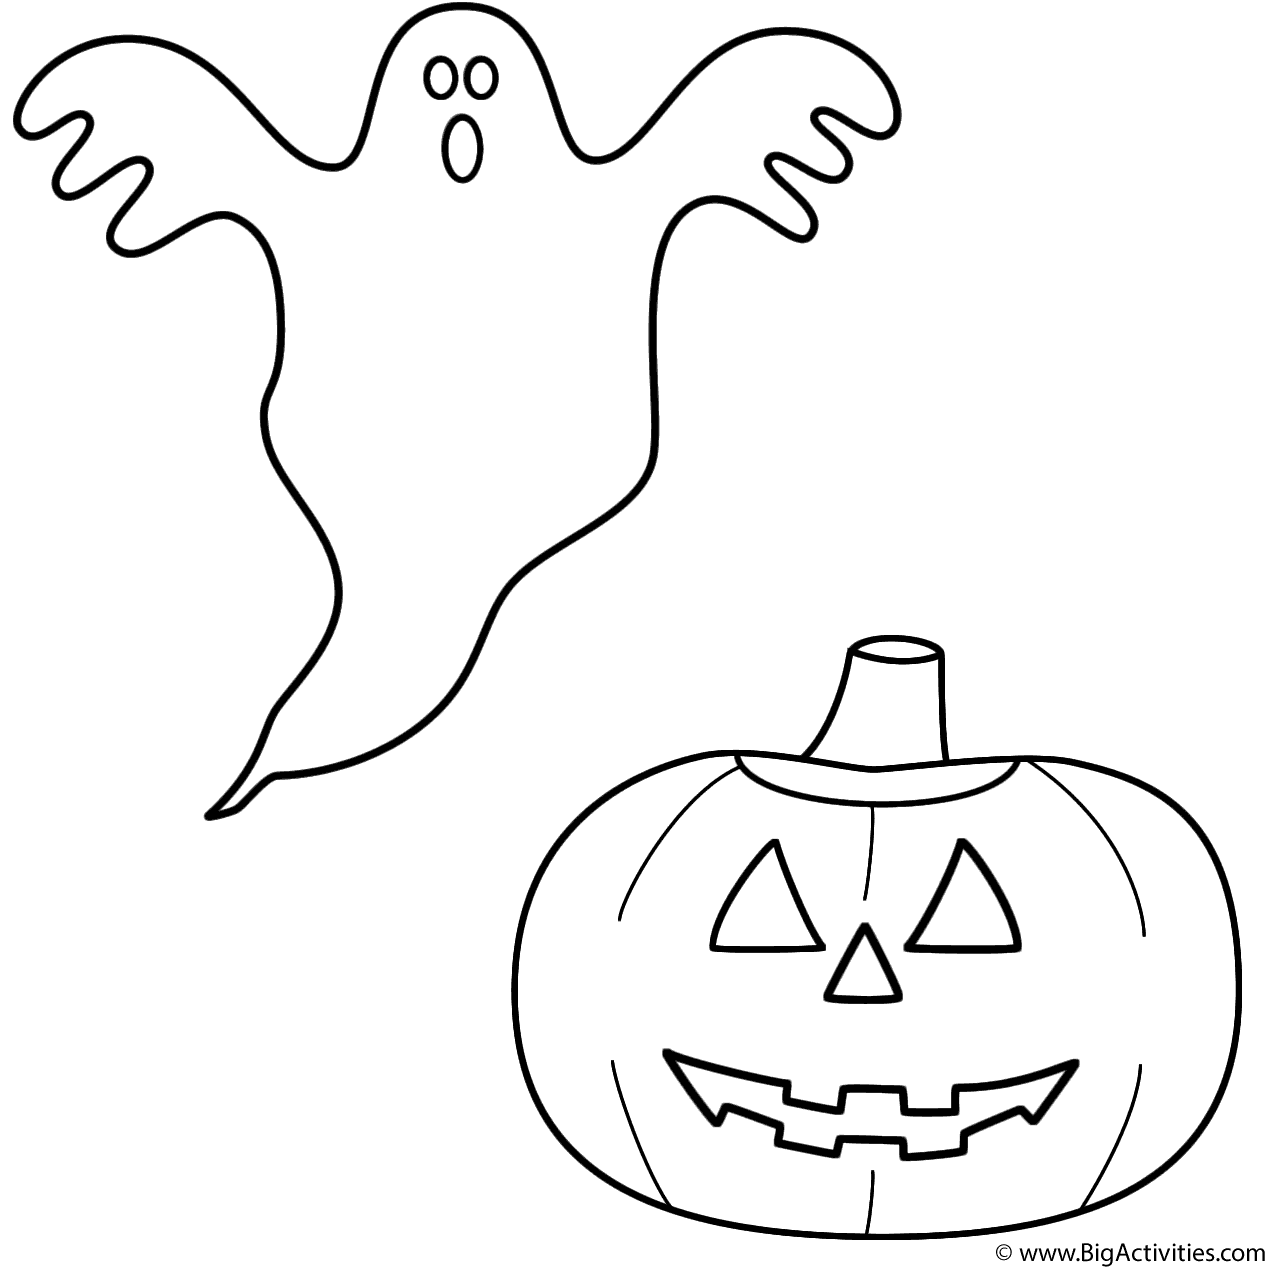 Ghost with pumpkinjack